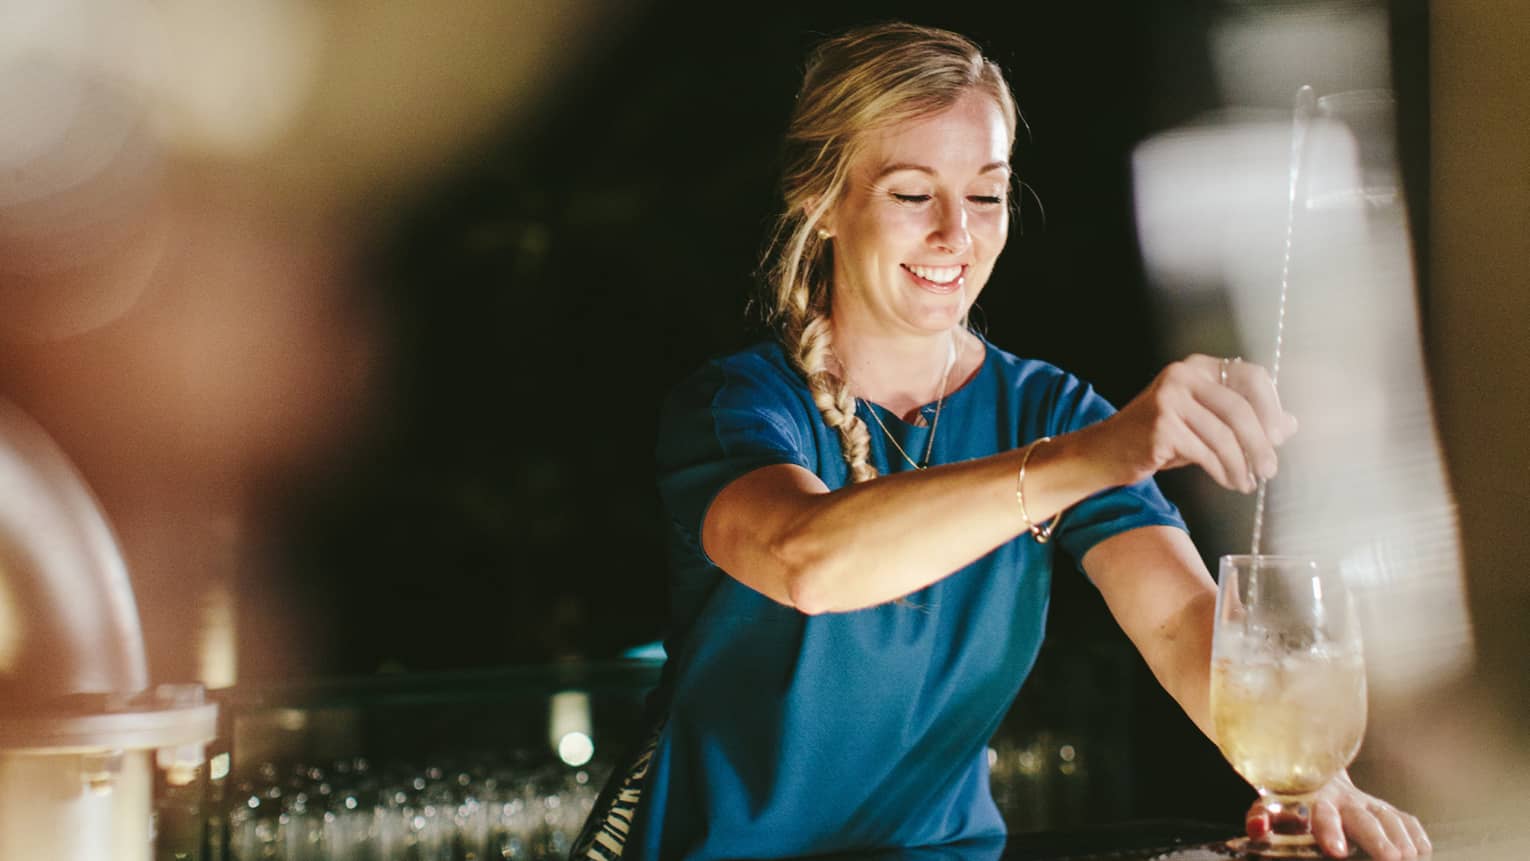 A mixologist puts together a drink at Lobby Lounge, Four Seasons Resort Maui at Wailea. She is mixing the drink and smiling.